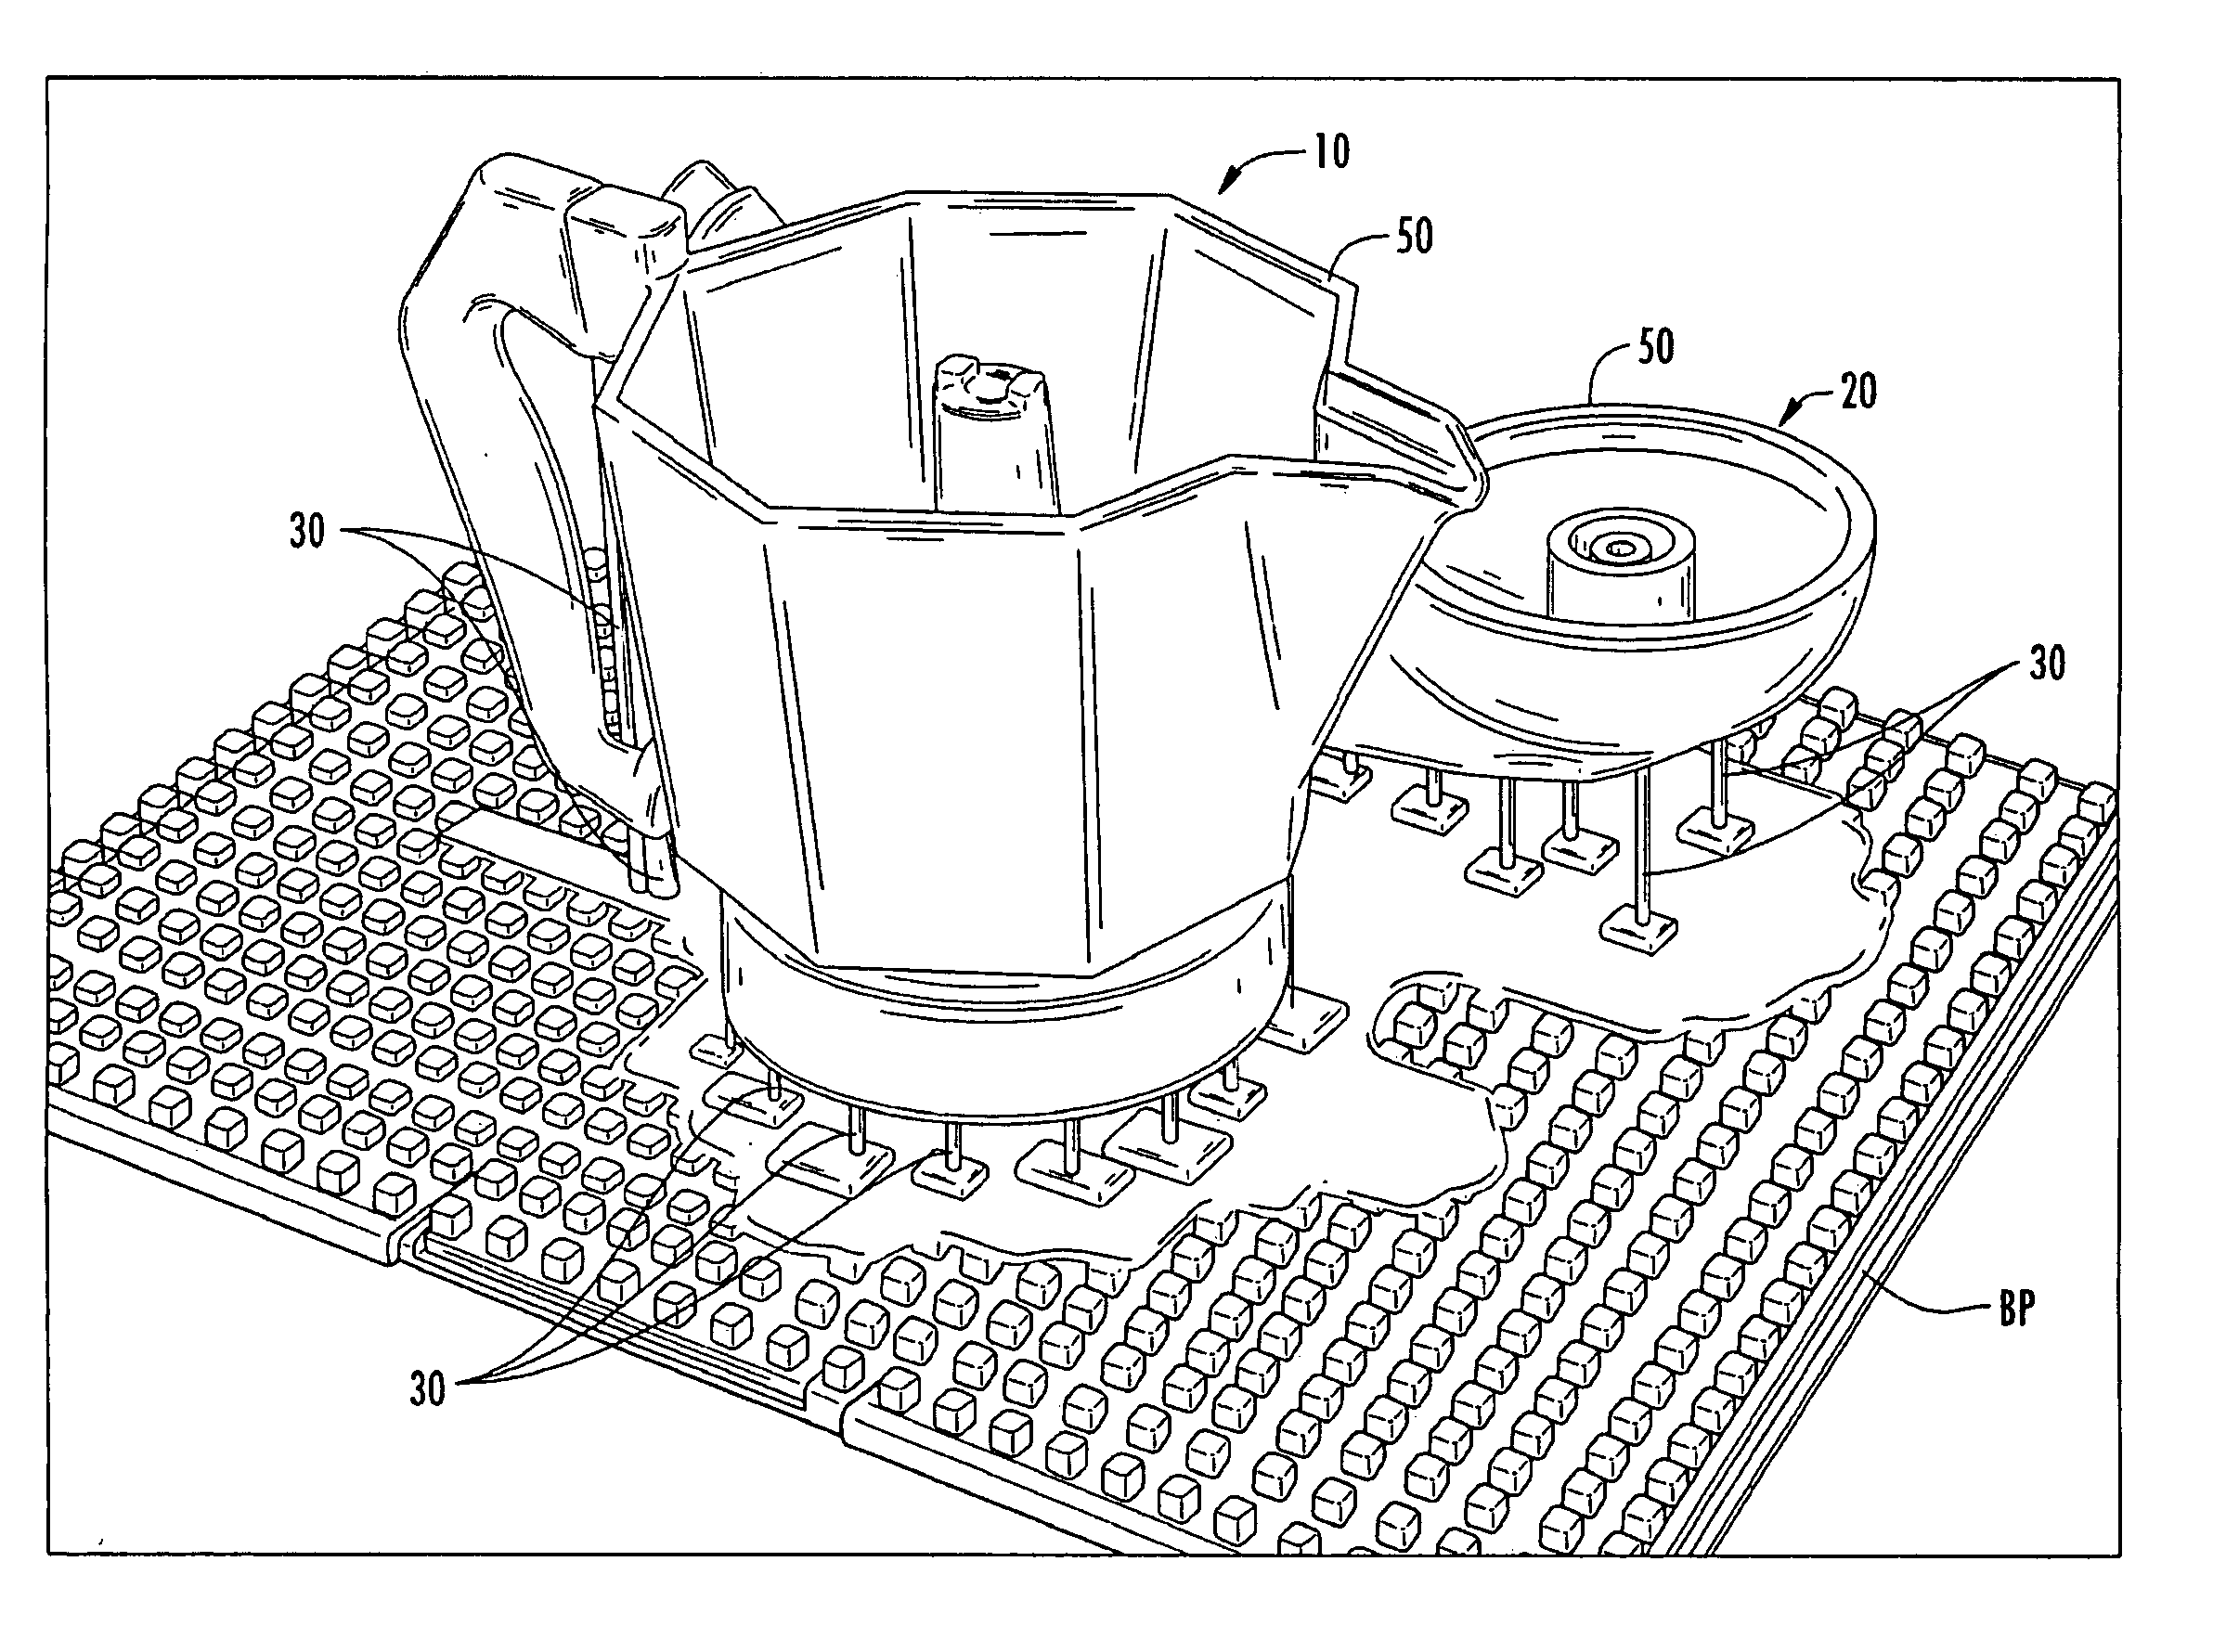 Region-Based Supports for Parts Produced by Solid Freeform Fabrication